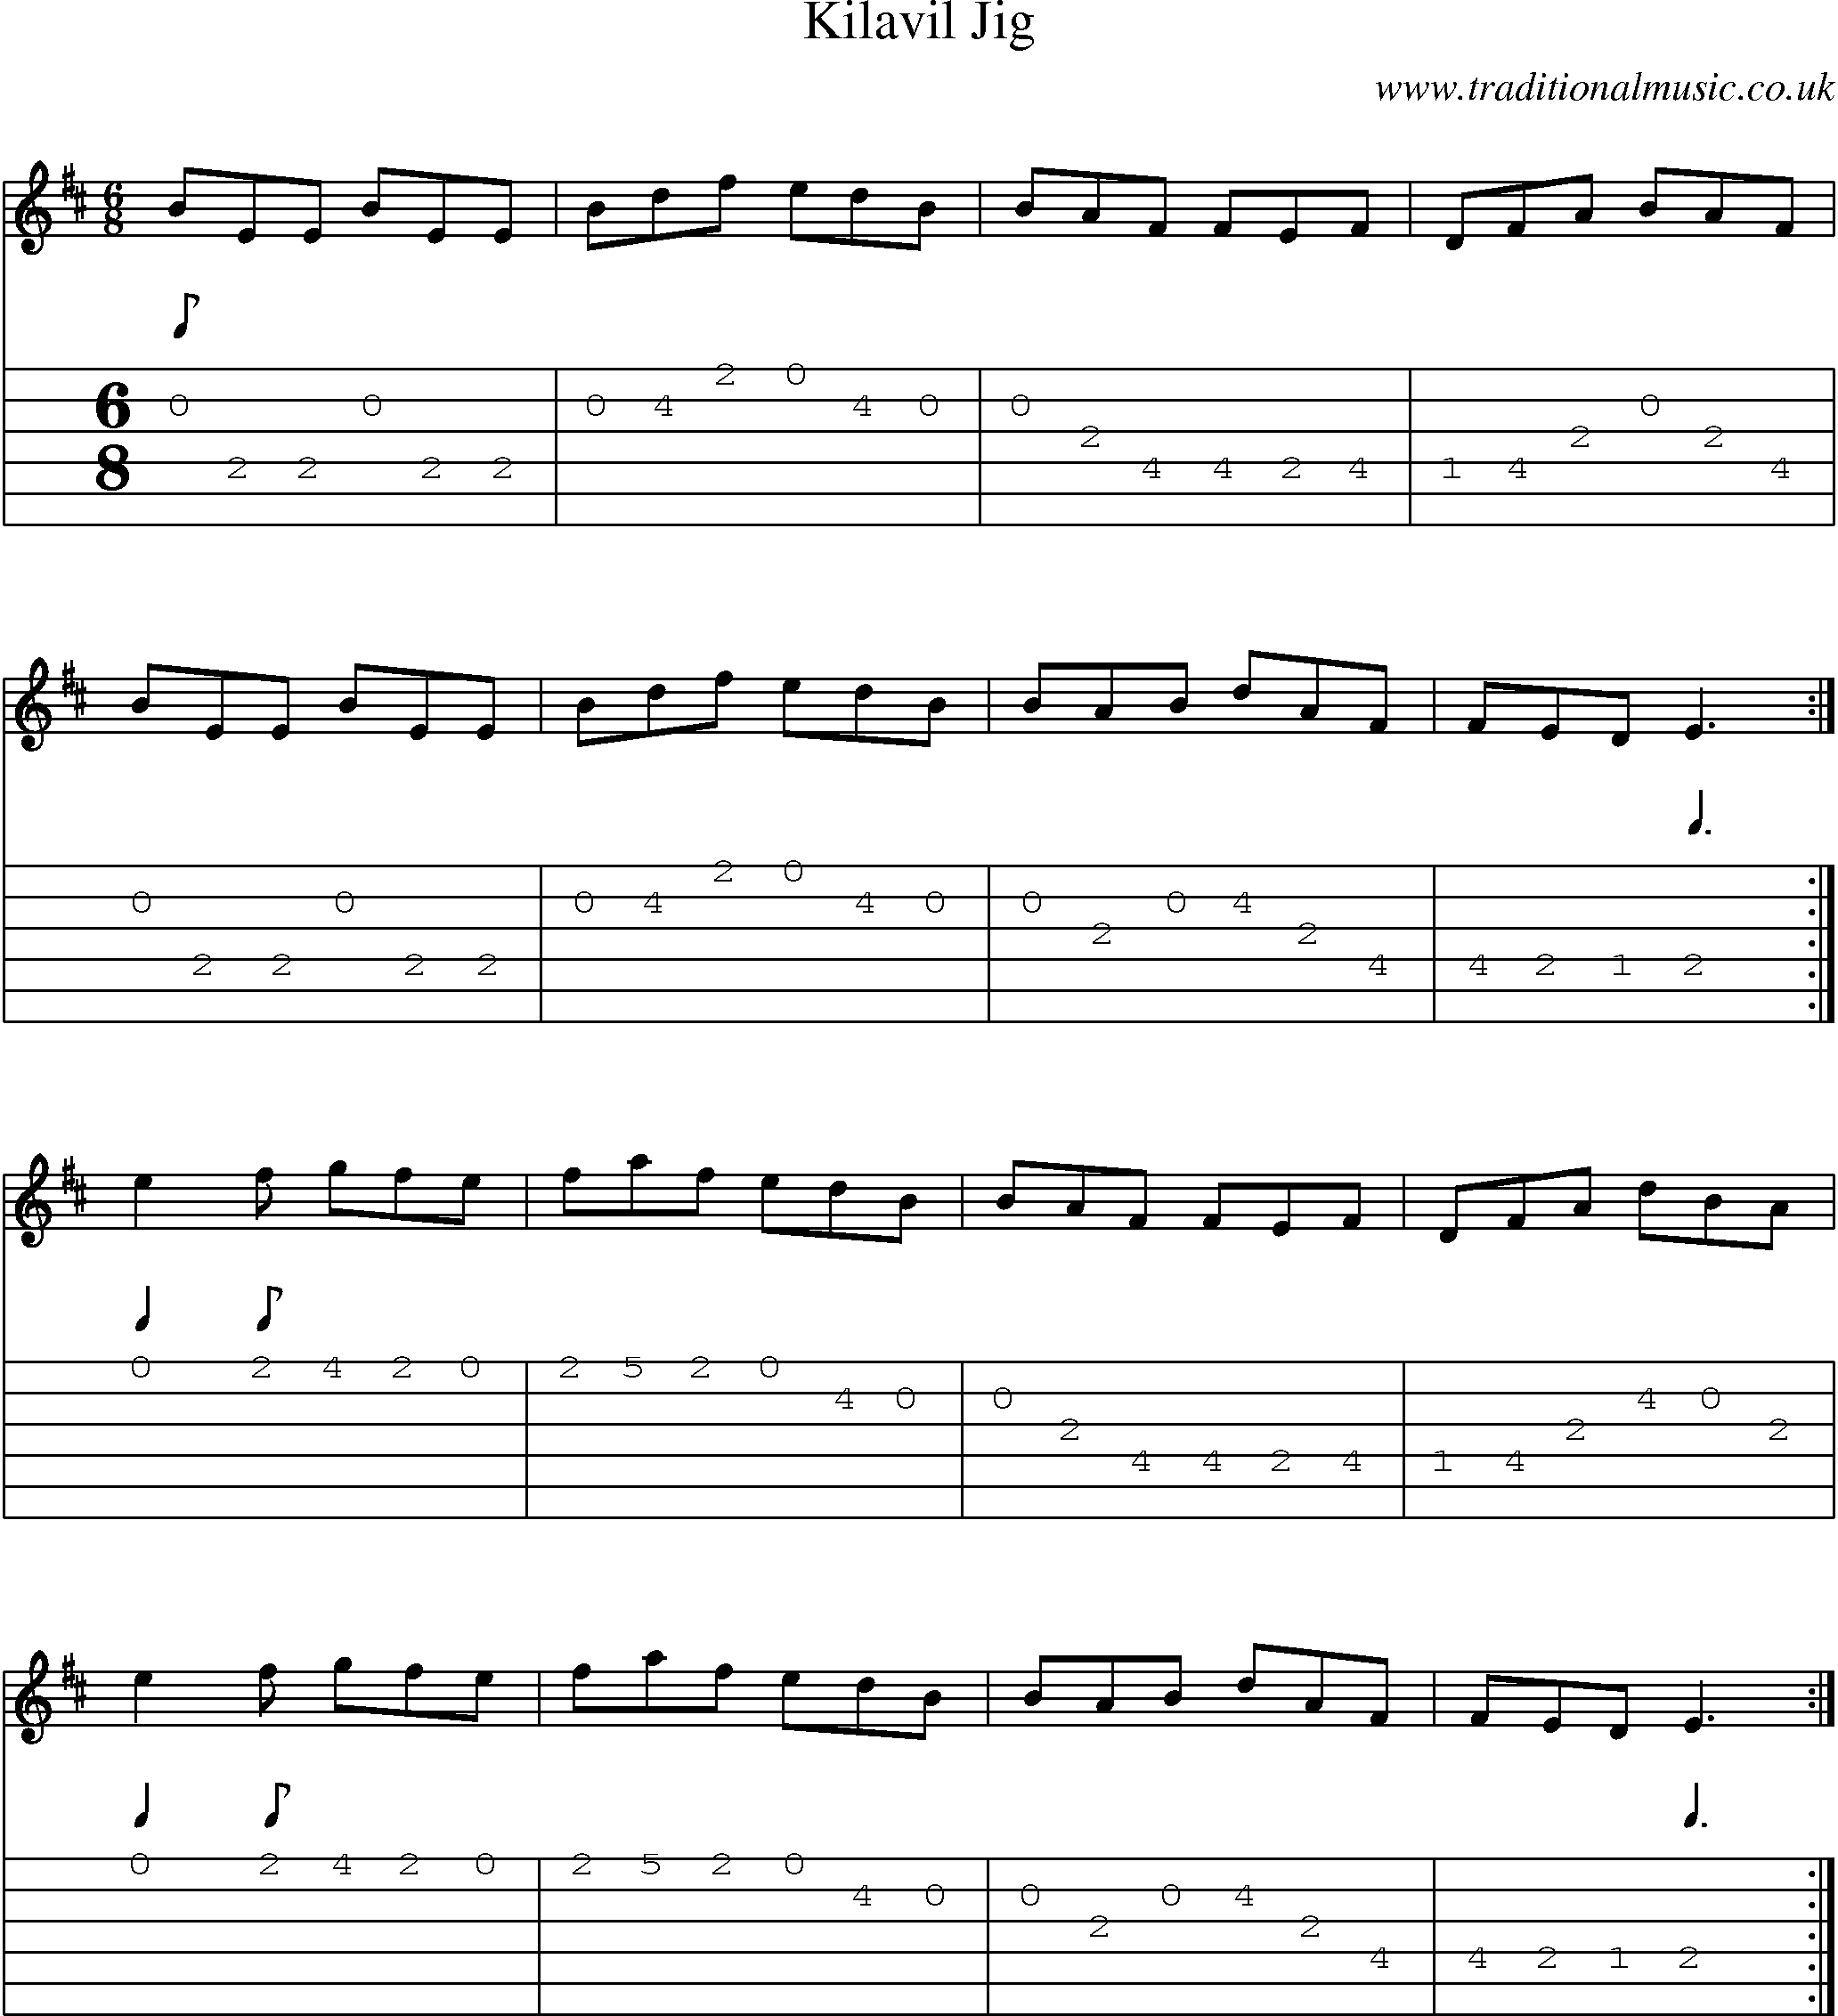 Music Score and Guitar Tabs for Kilavil Jig